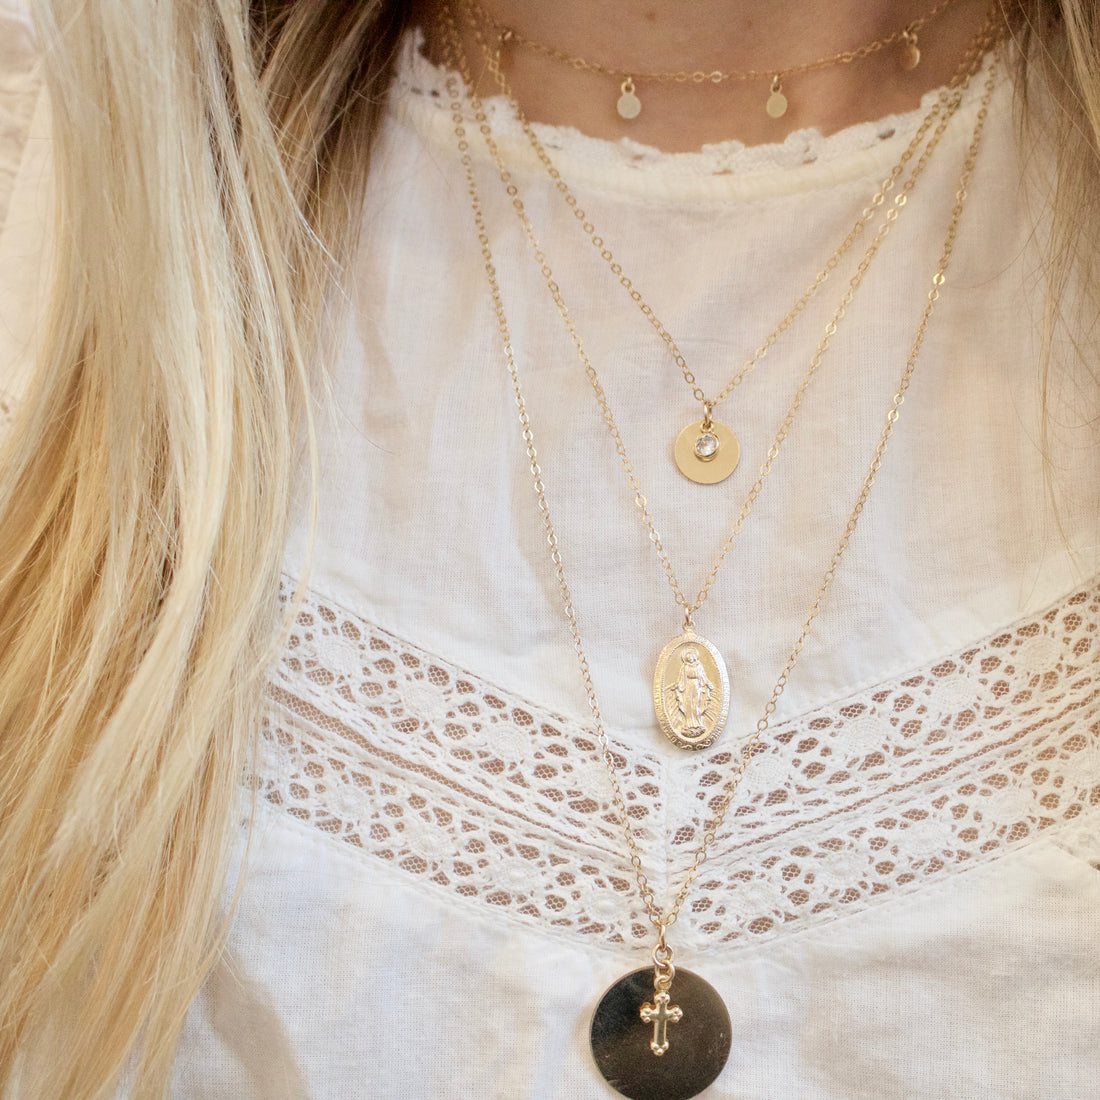 How To Effortlessly Layer Necklaces